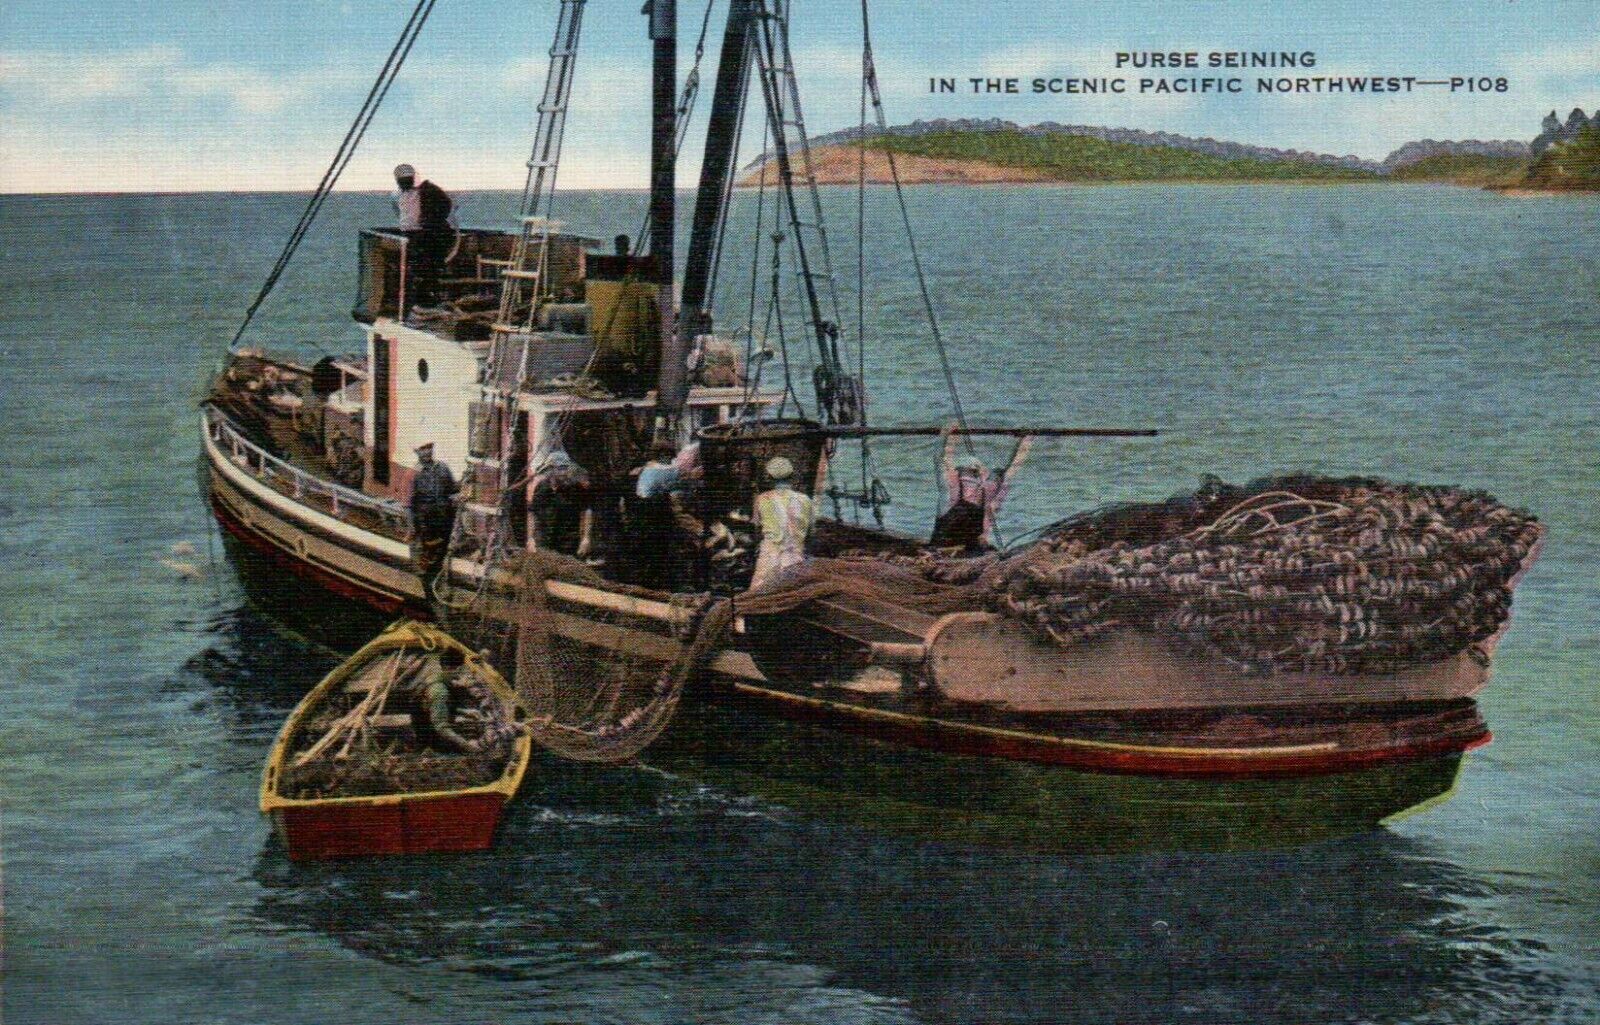 Purse Seining Scenic Pacific Northwest Net Fishing Boat - Old Vintage  Postcard for Sale - Final Fantasy Compendium